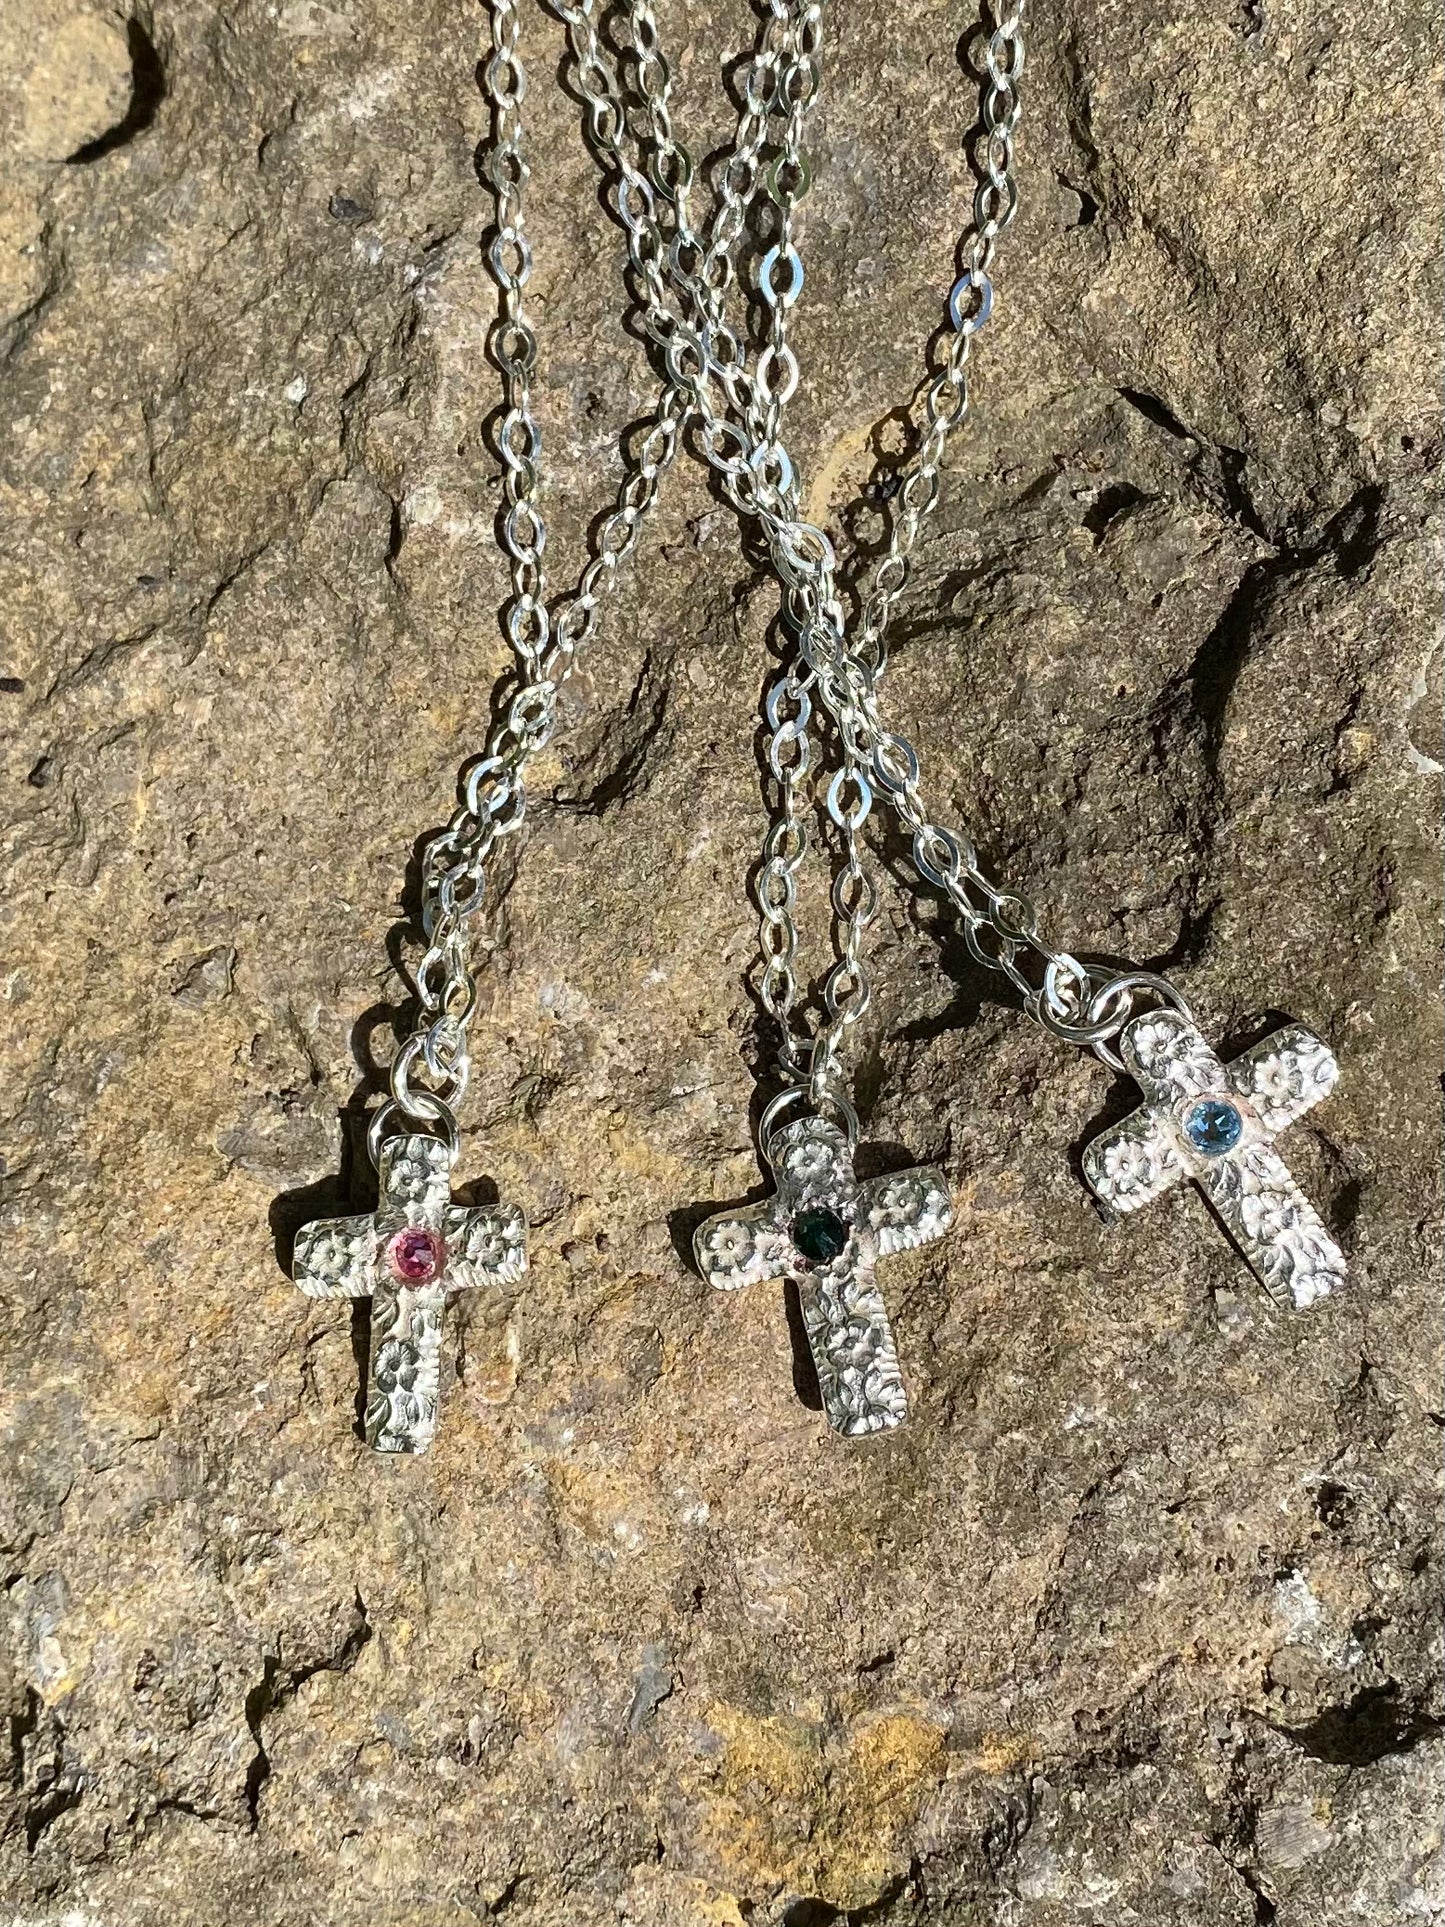 Silver cross necklace - collectionsbytracy.com